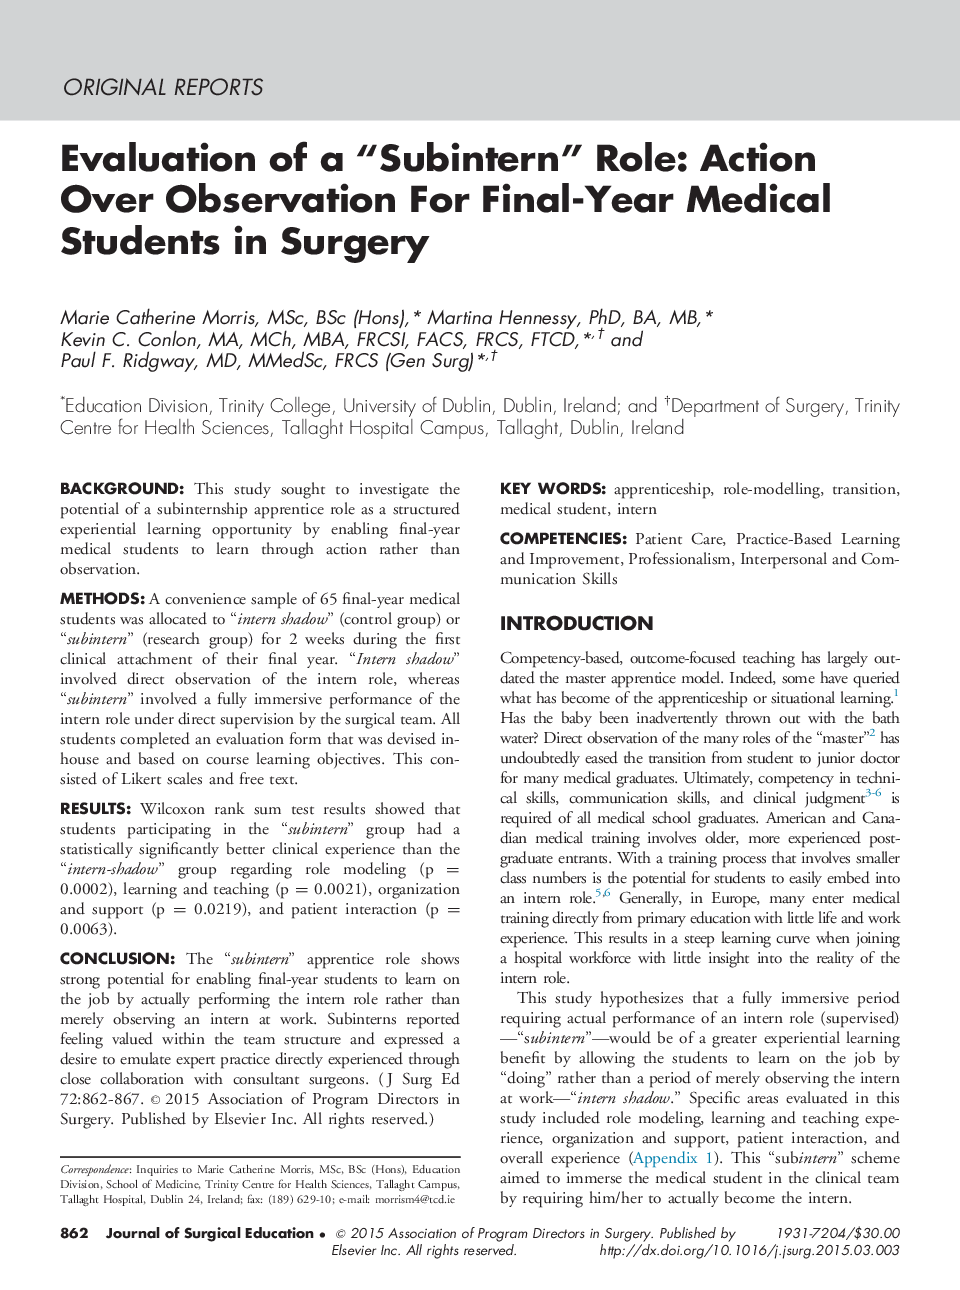 Evaluation of a “Subintern” Role: Action Over Observation For Final-Year Medical Students in Surgery